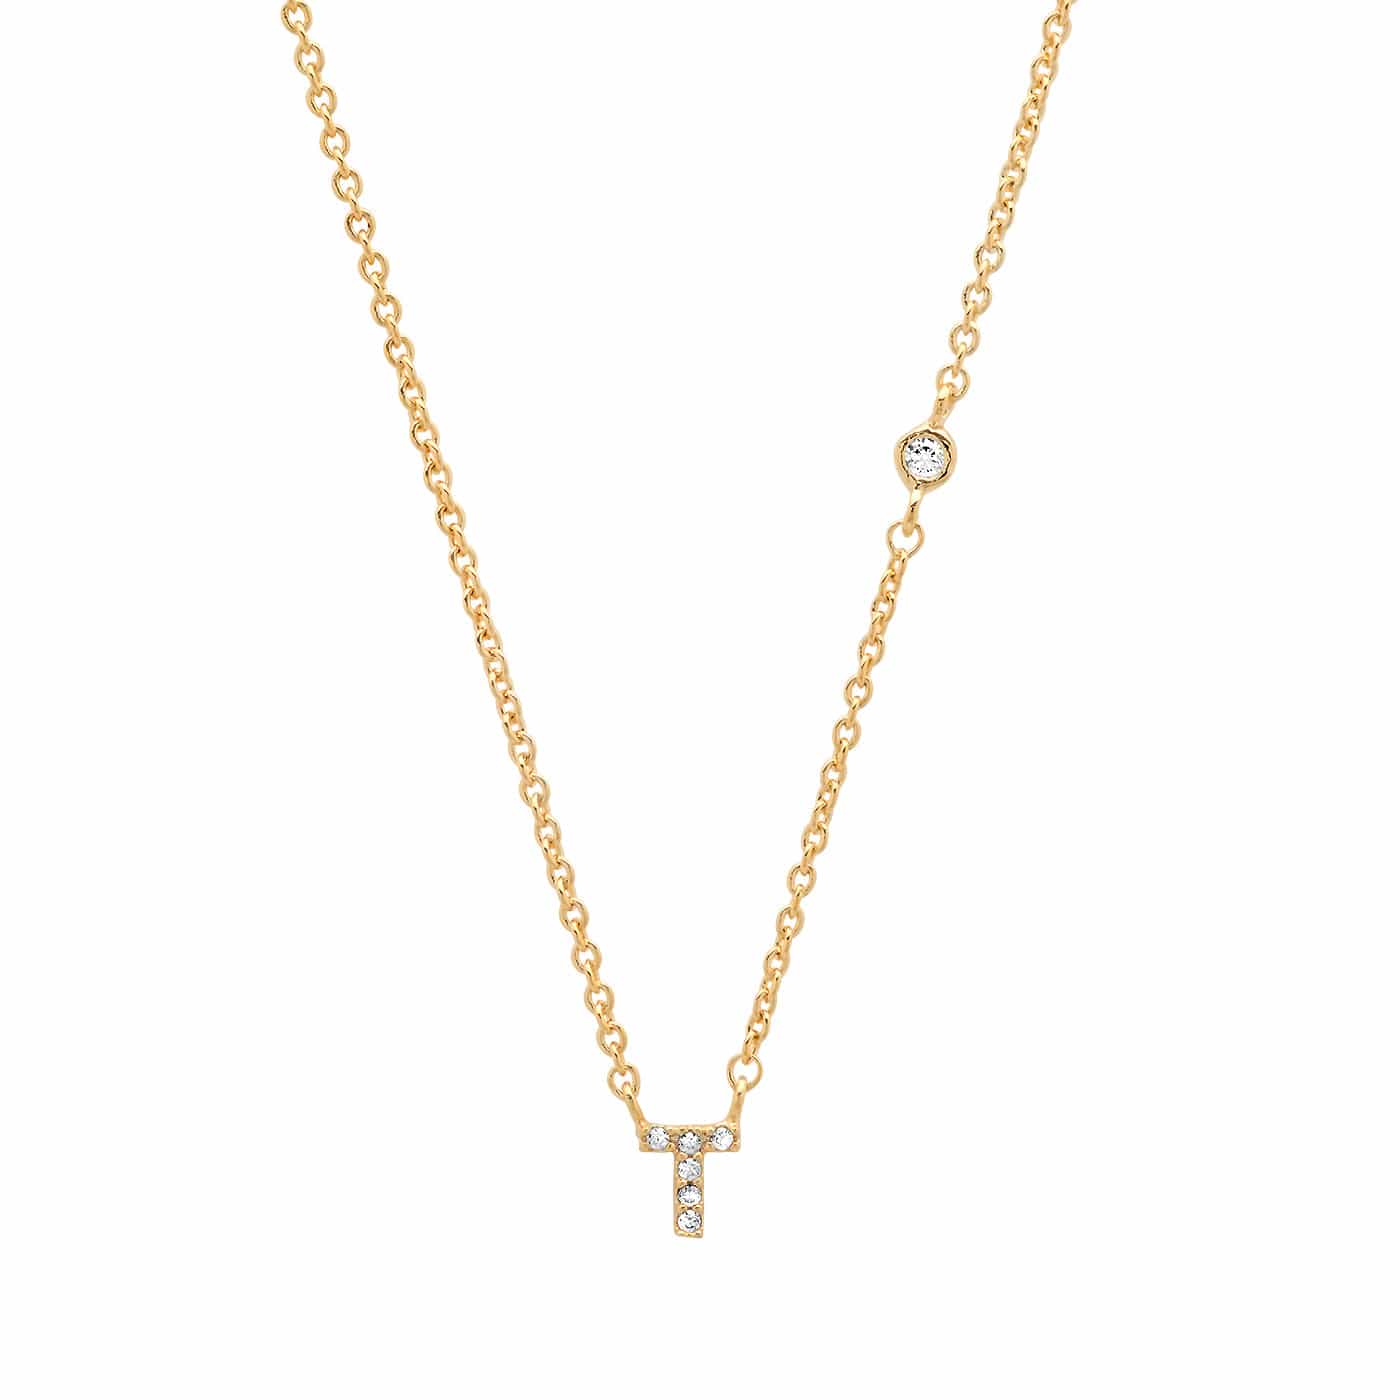 TAI JEWELRY Necklace Gold / T CZ Initial Necklace